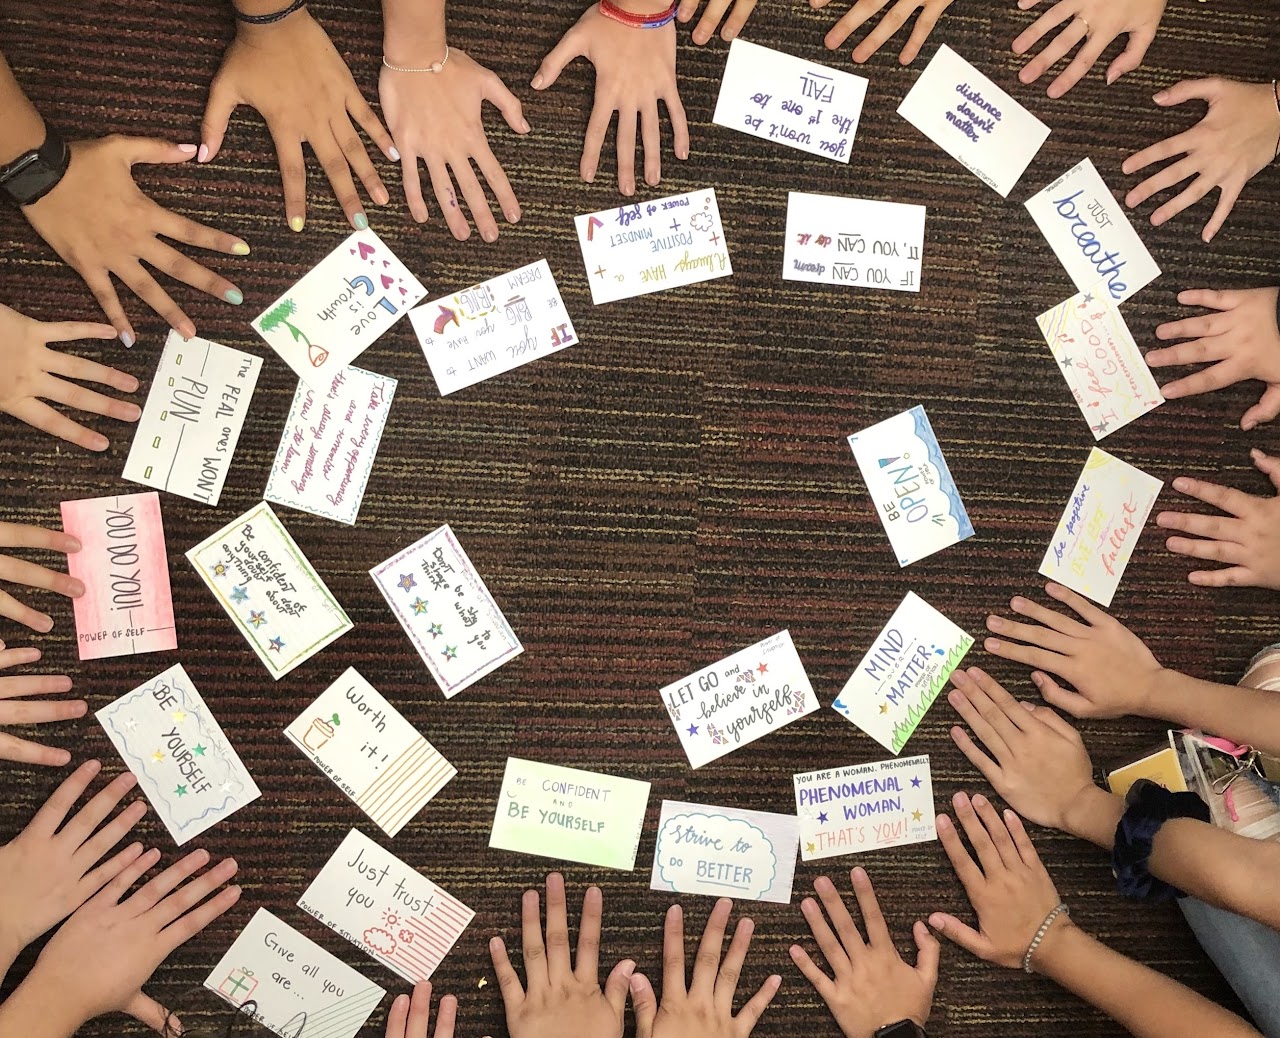 Several students hands in a cricle around some index cards with Mantras written on them